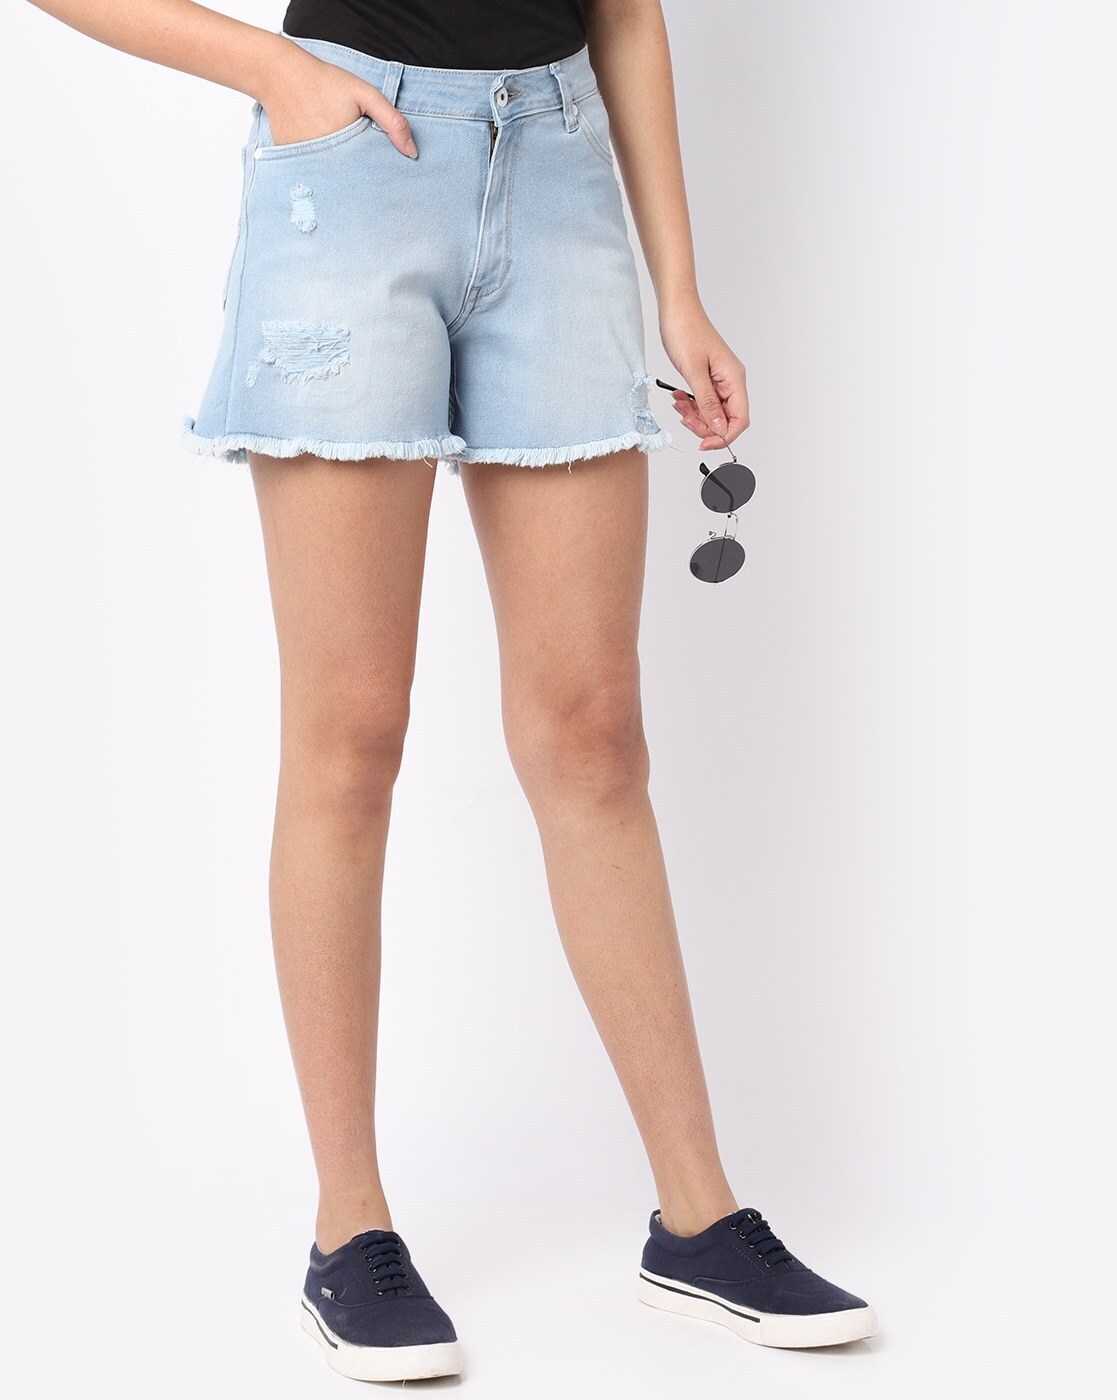 Pepe Jeans Denim Shorts in Azure Blue Womens Clothing Shorts Jean and denim shorts 